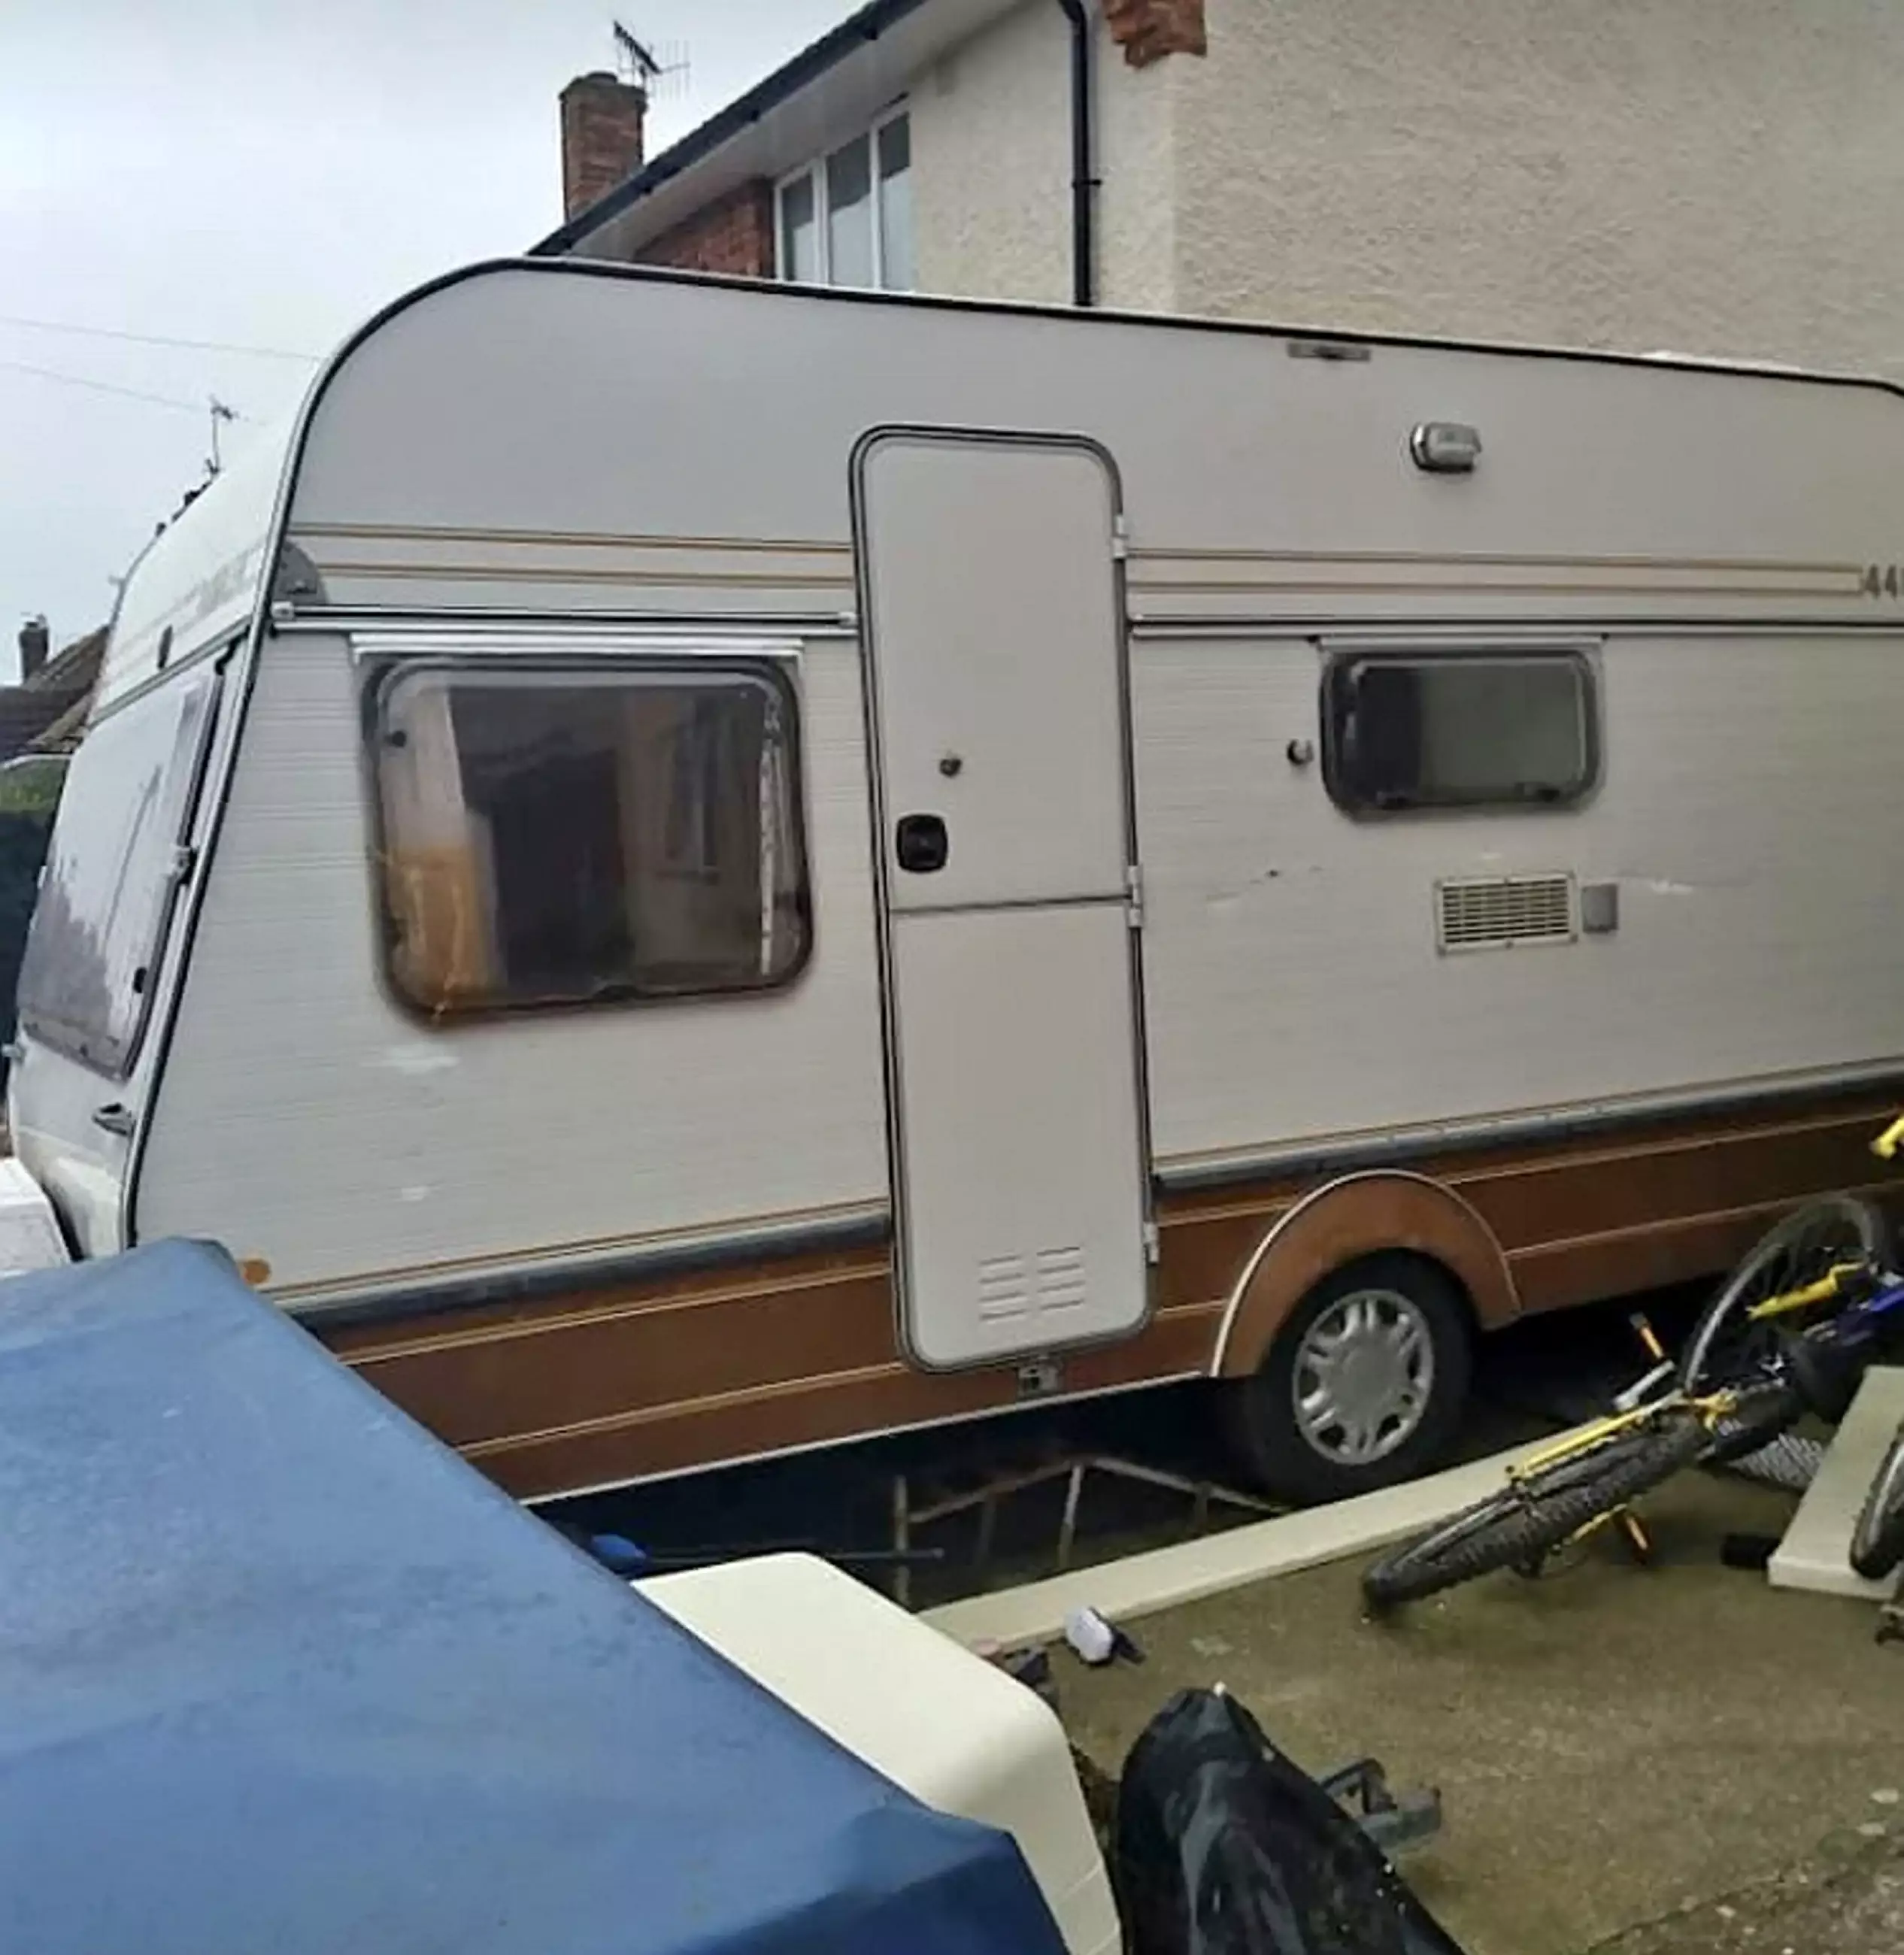 Charlotte and Anthony are now looking for somewhere to park the caravan.